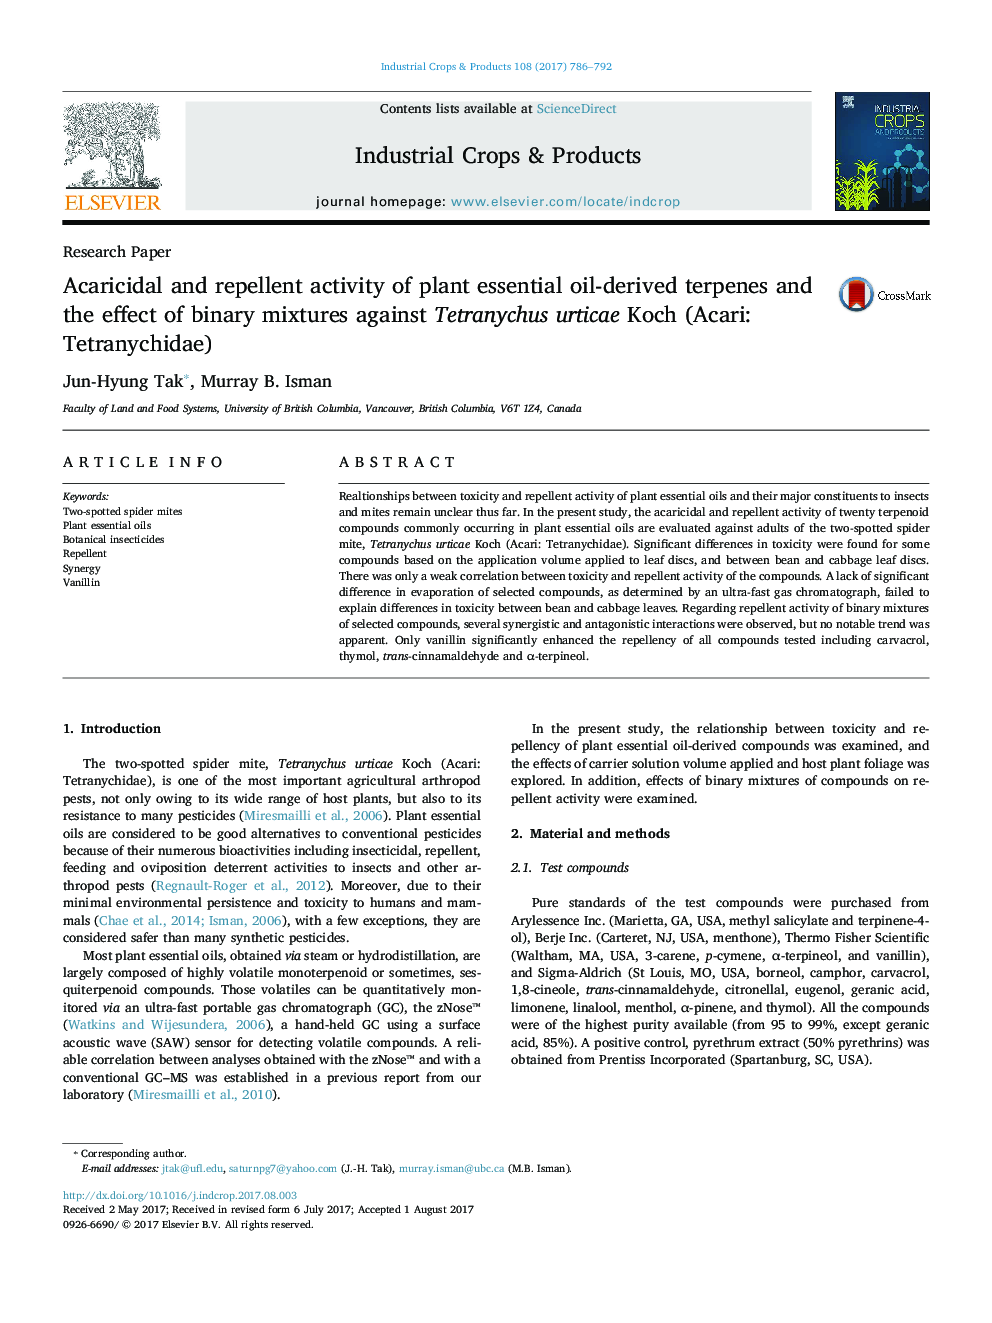 Acaricidal and repellent activity of plant essential oil-derived terpenes and the effect of binary mixtures against Tetranychus urticae Koch (Acari: Tetranychidae)